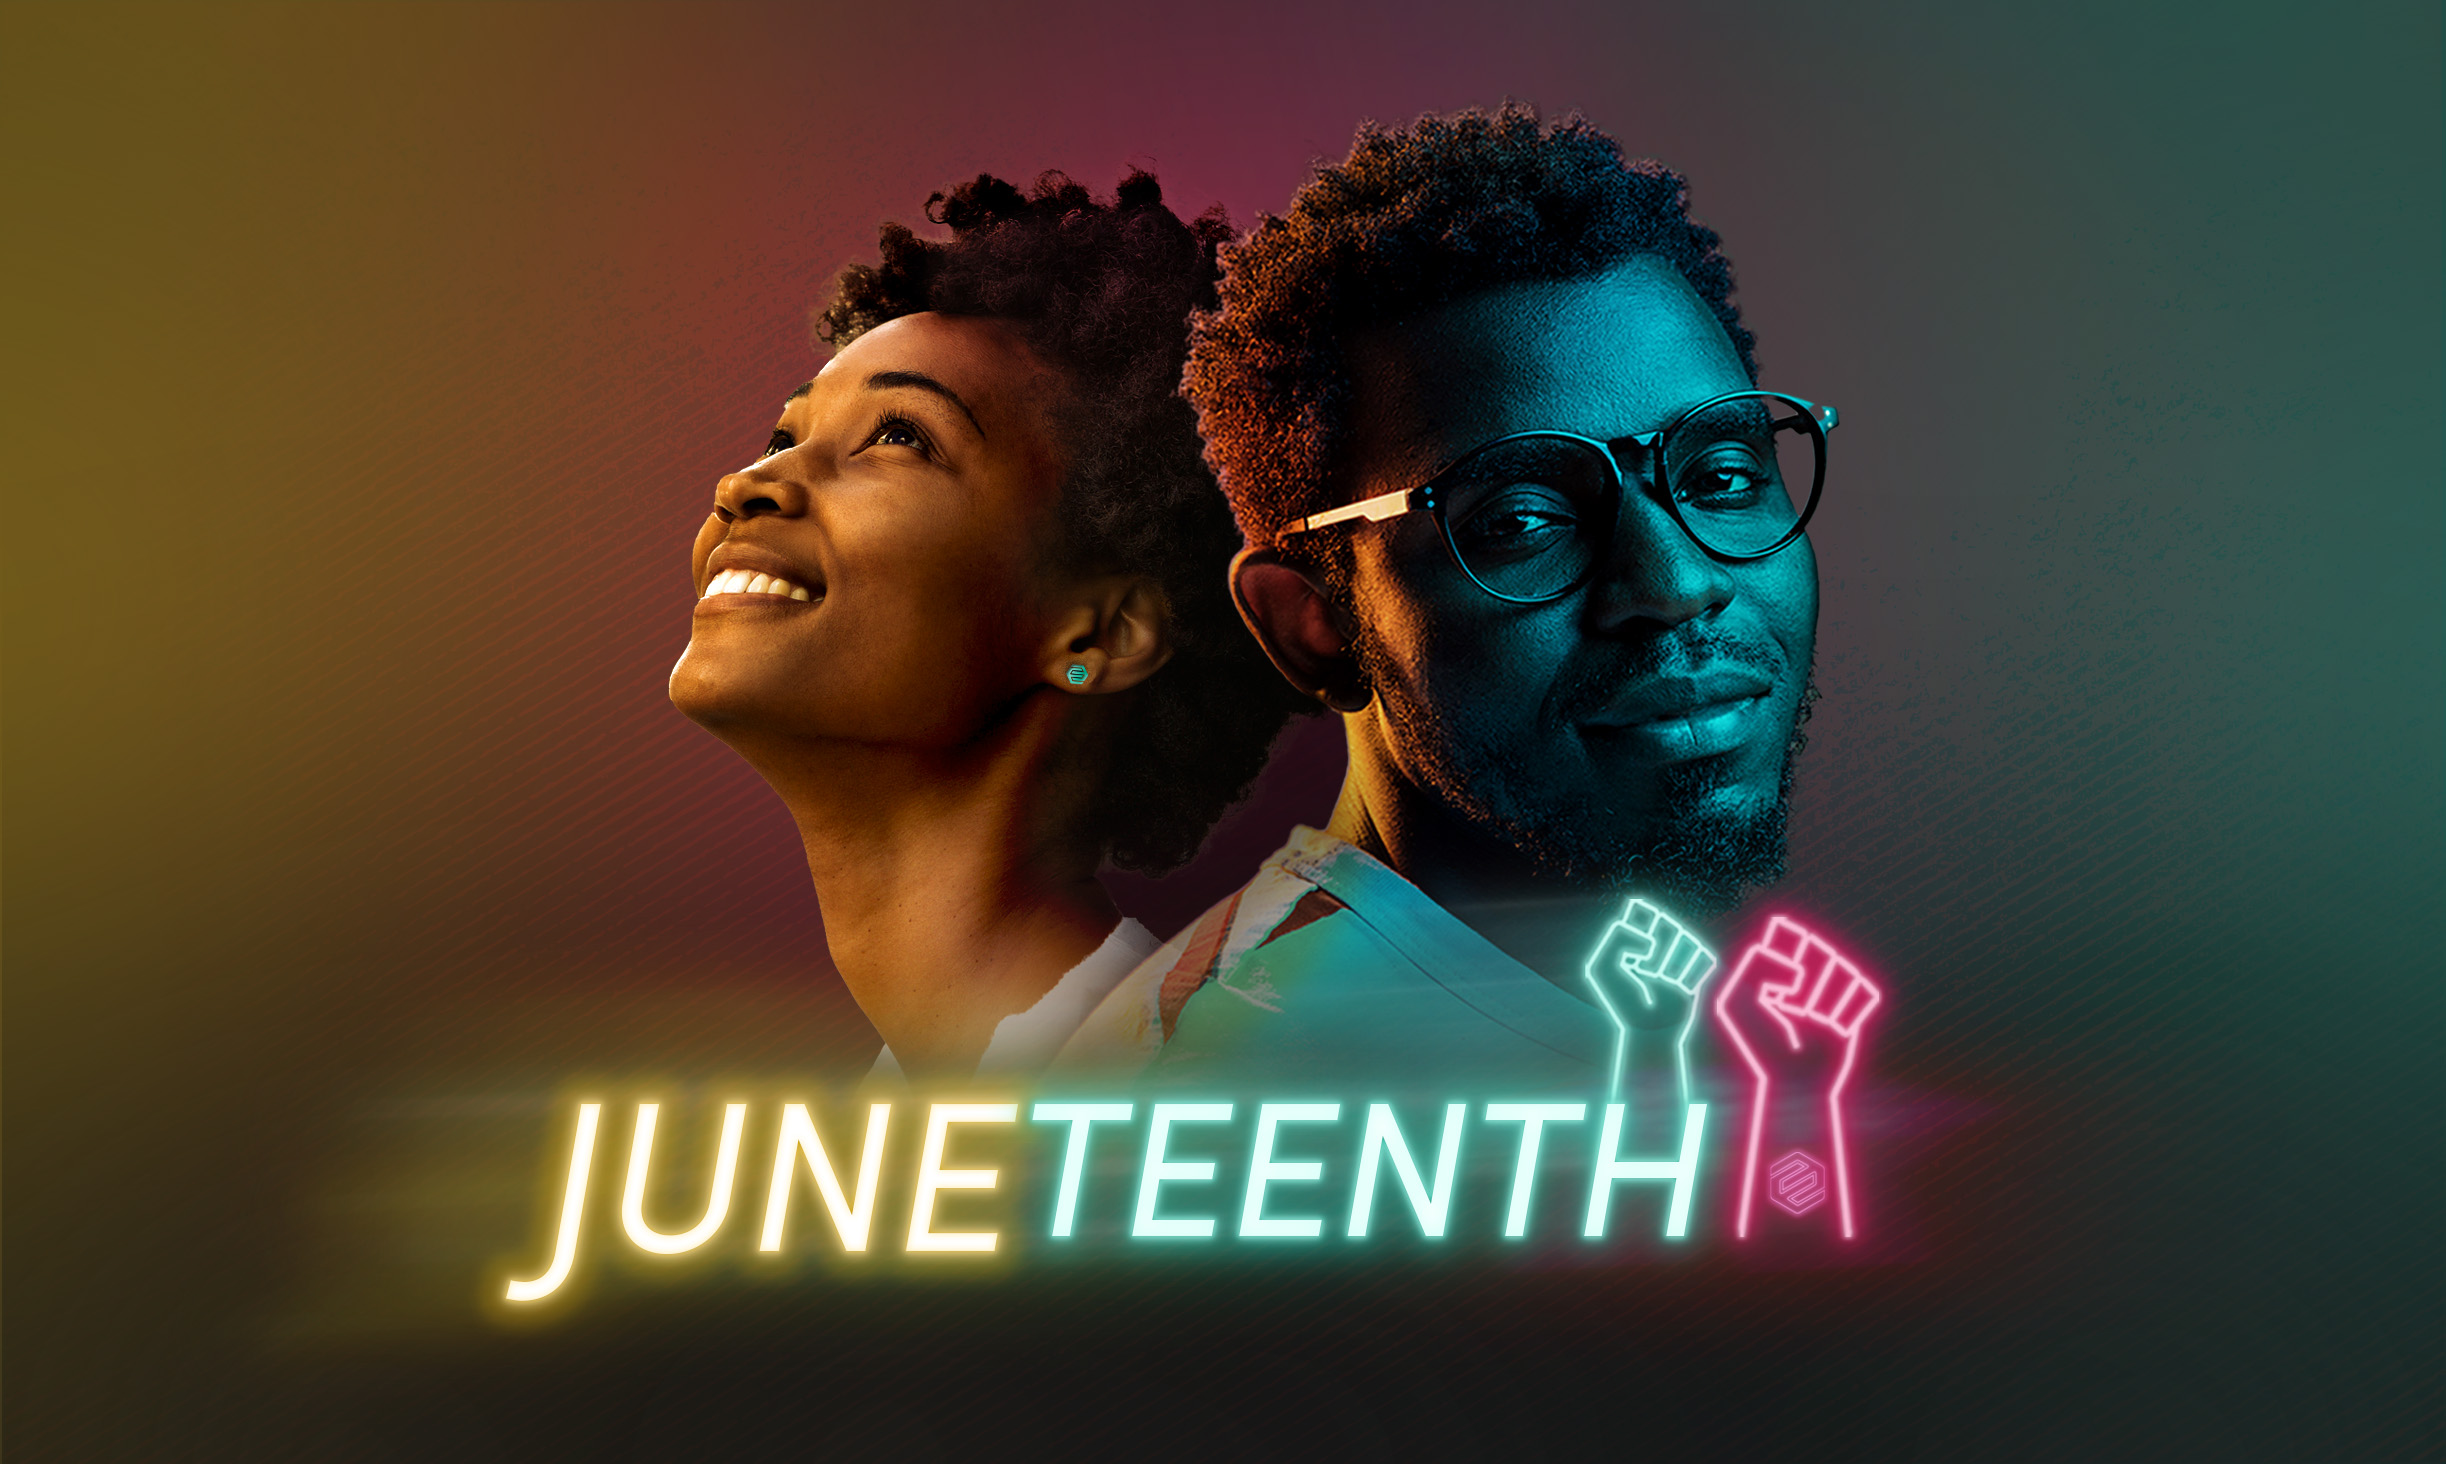 Juneteenth: A Candid Perspective on Racial Equality and the Road Ahead